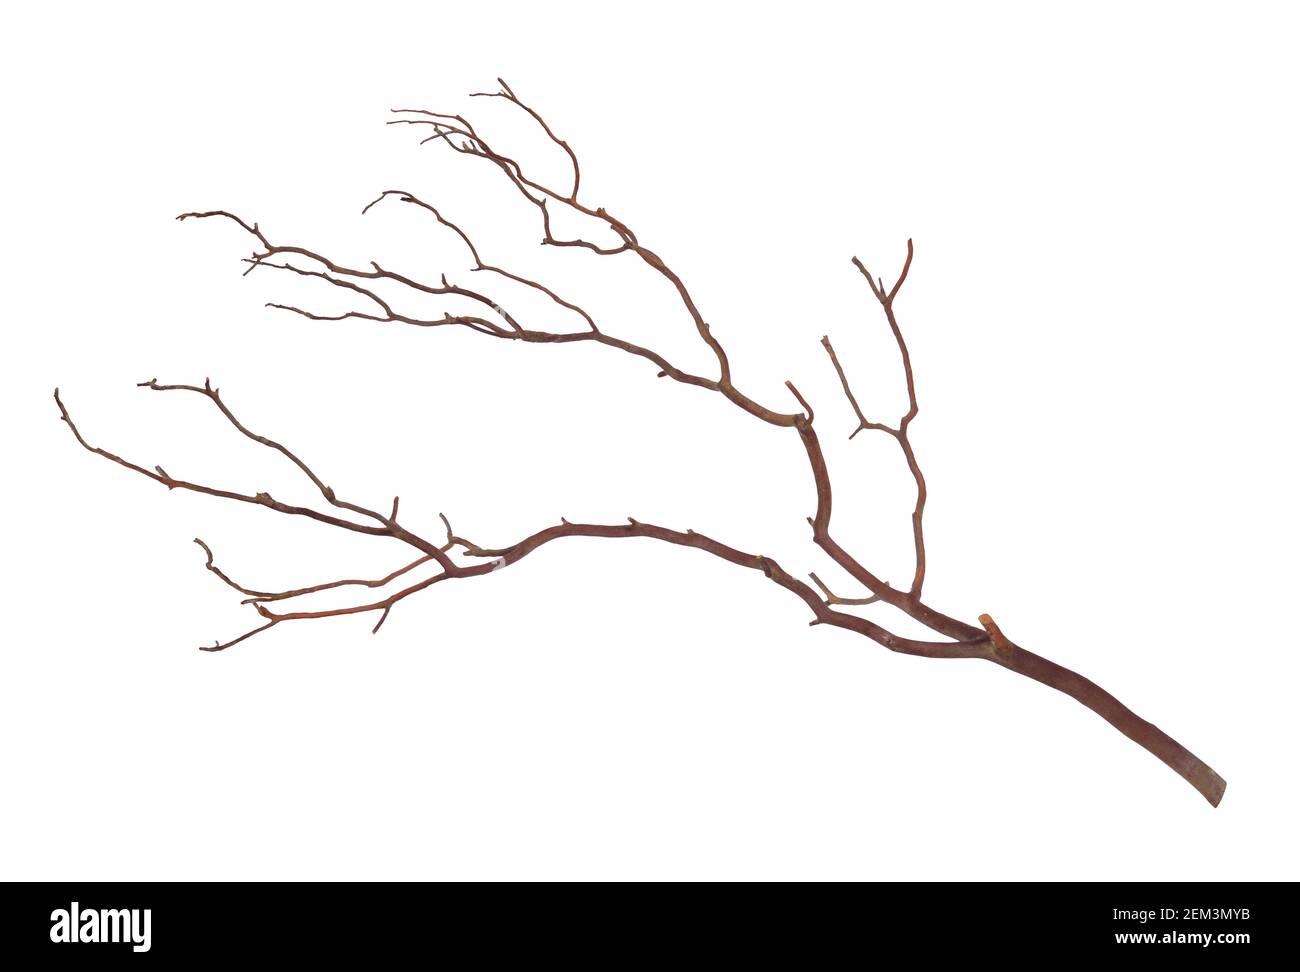 Plane tree or Platanus branch isolated on white background. Stock Photo